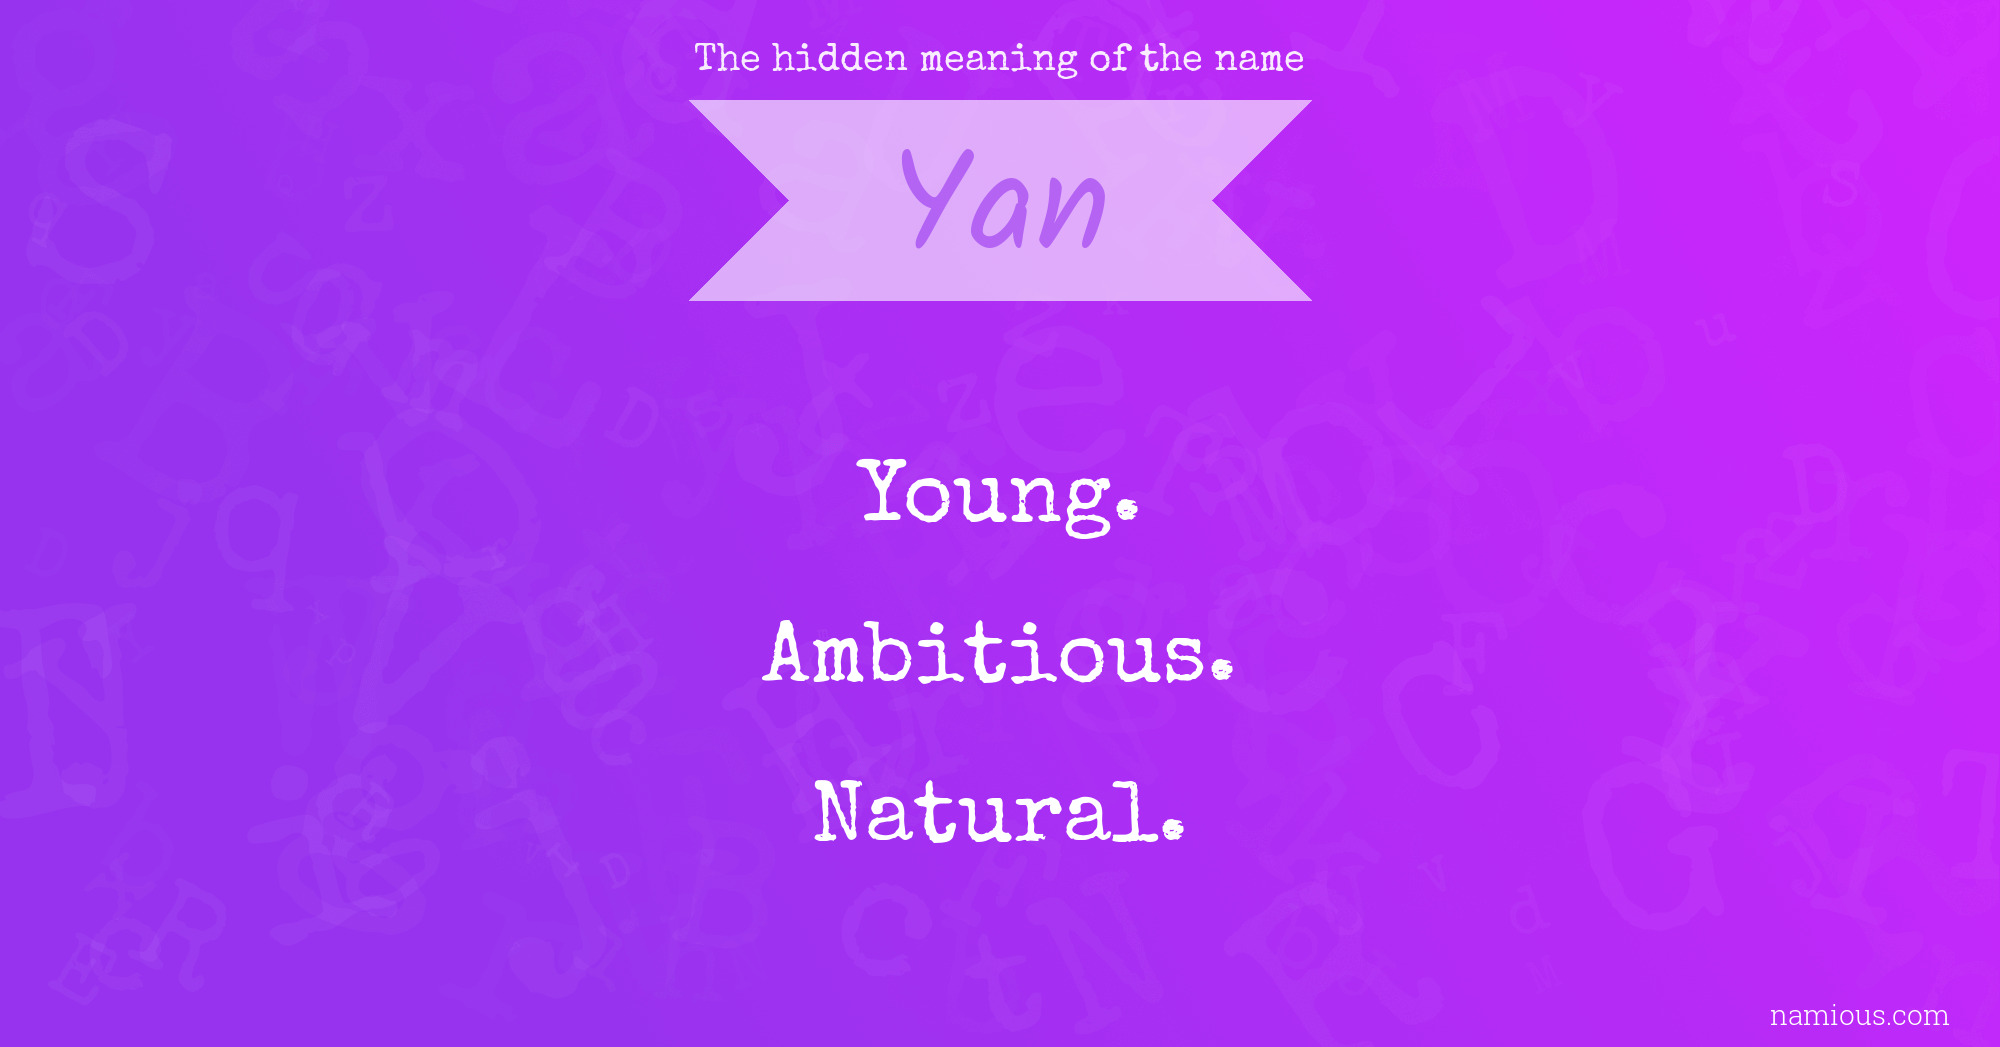 The hidden meaning of the name Yan